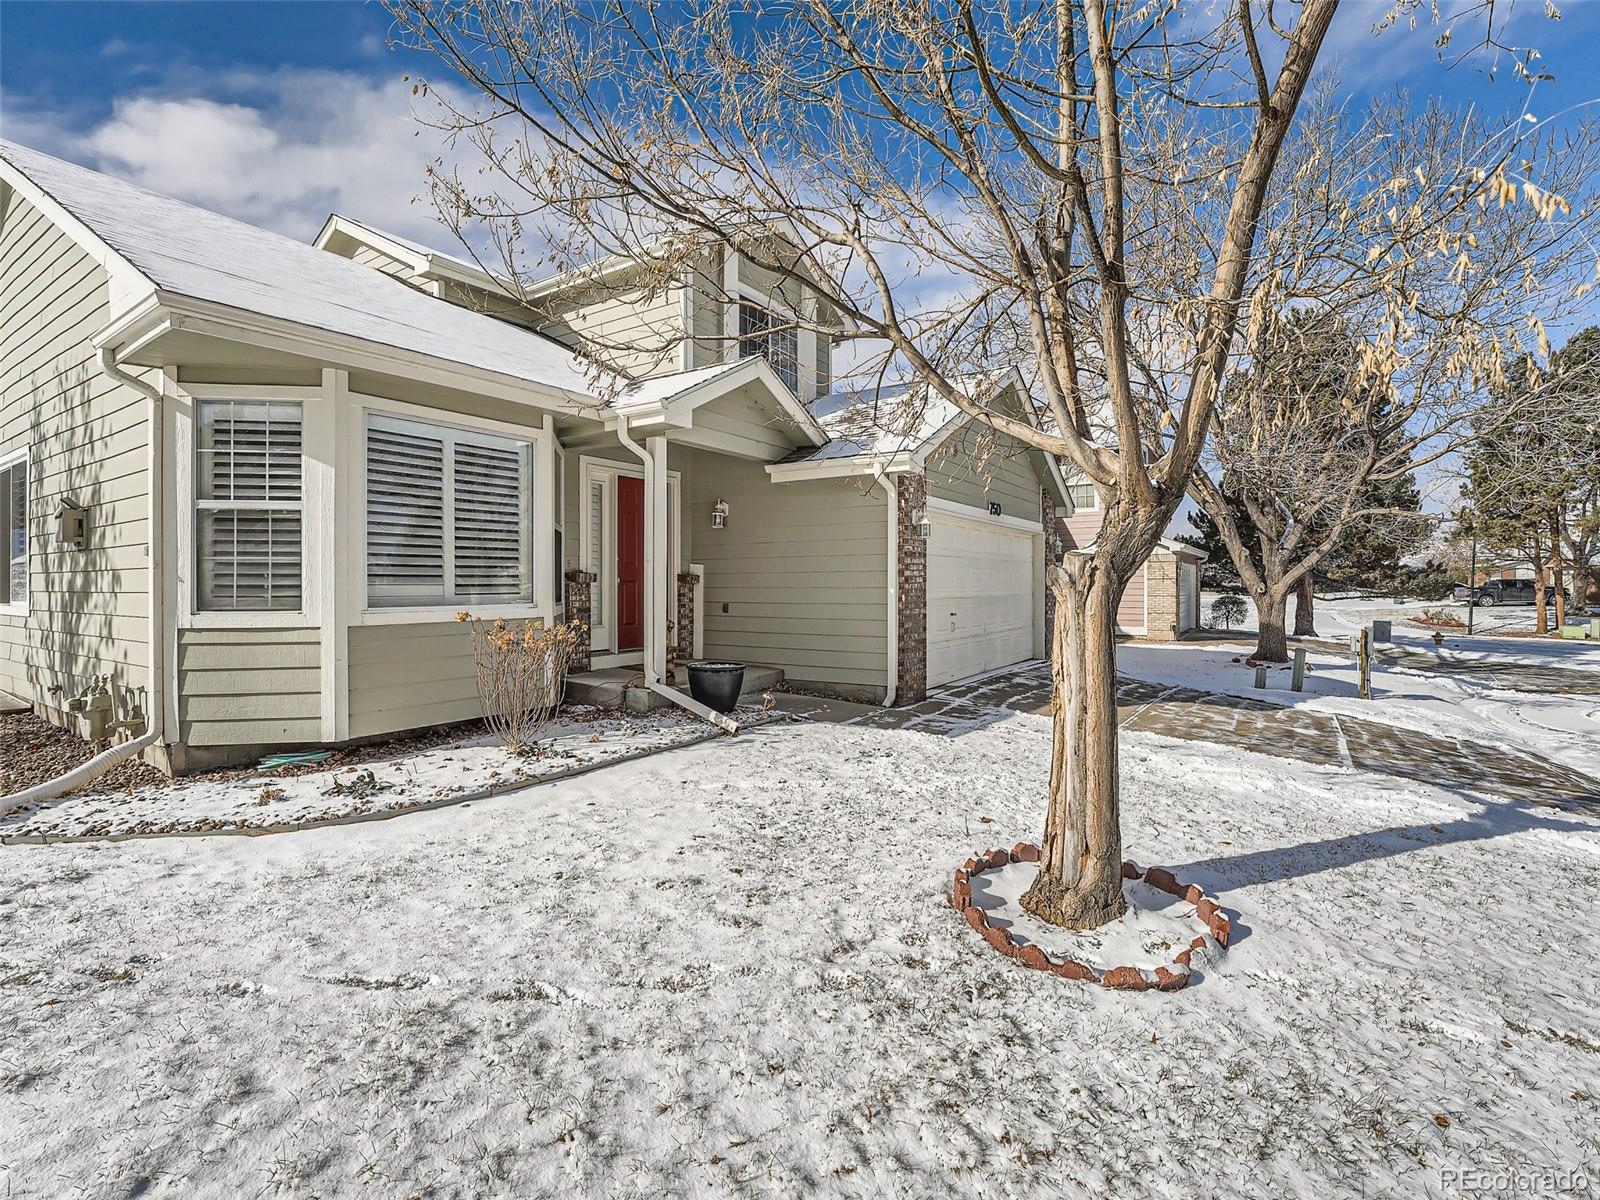 750 w jamison circle, Littleton sold home. Closed on 2024-03-14 for $598,500.